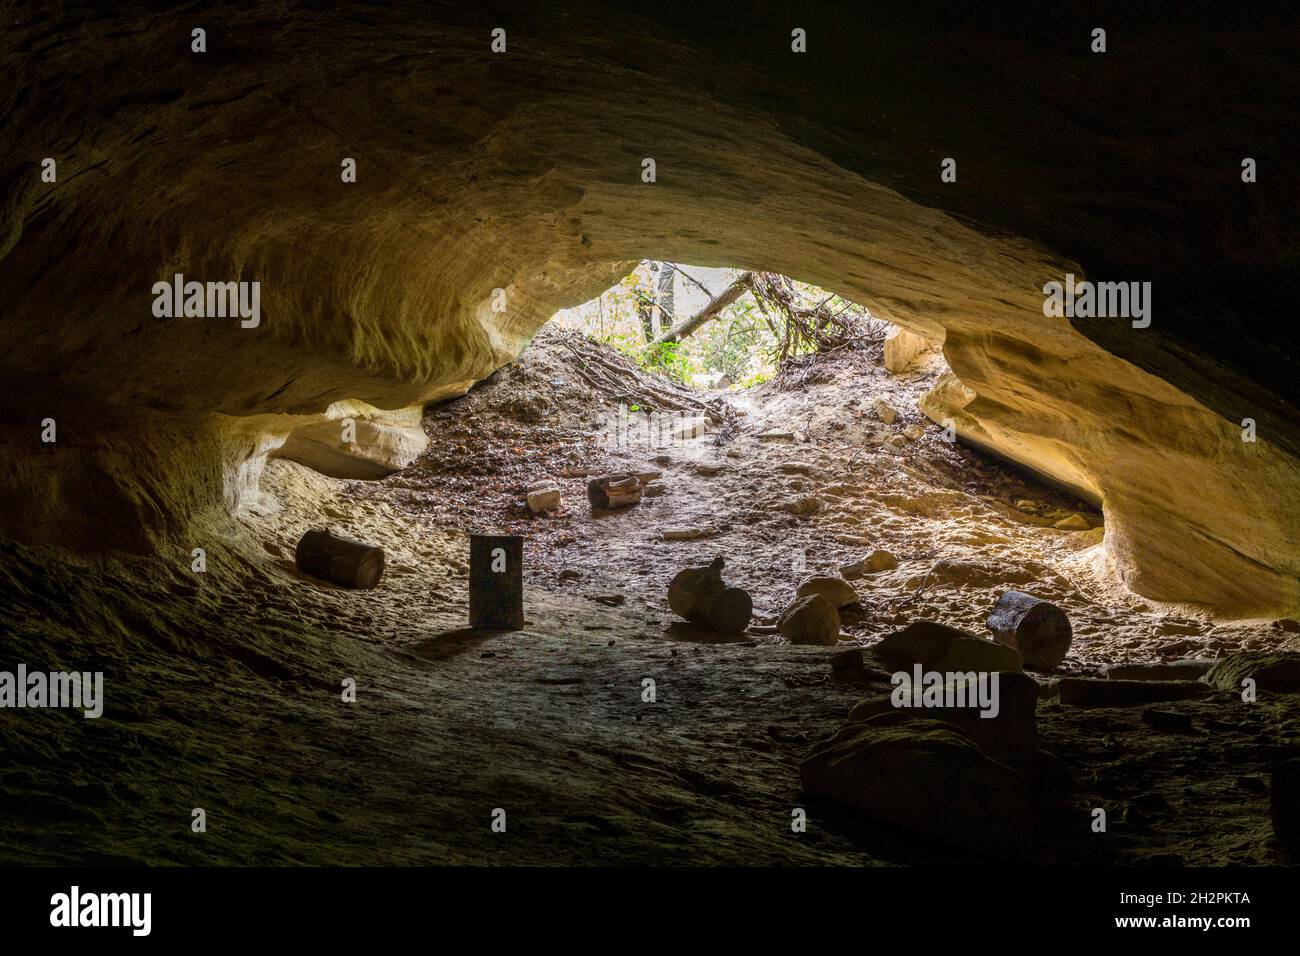 Ferenc-barlang (Ferenc cave) from inside. A small sandstone cave at the border of Hungary-Austria Stock Photo